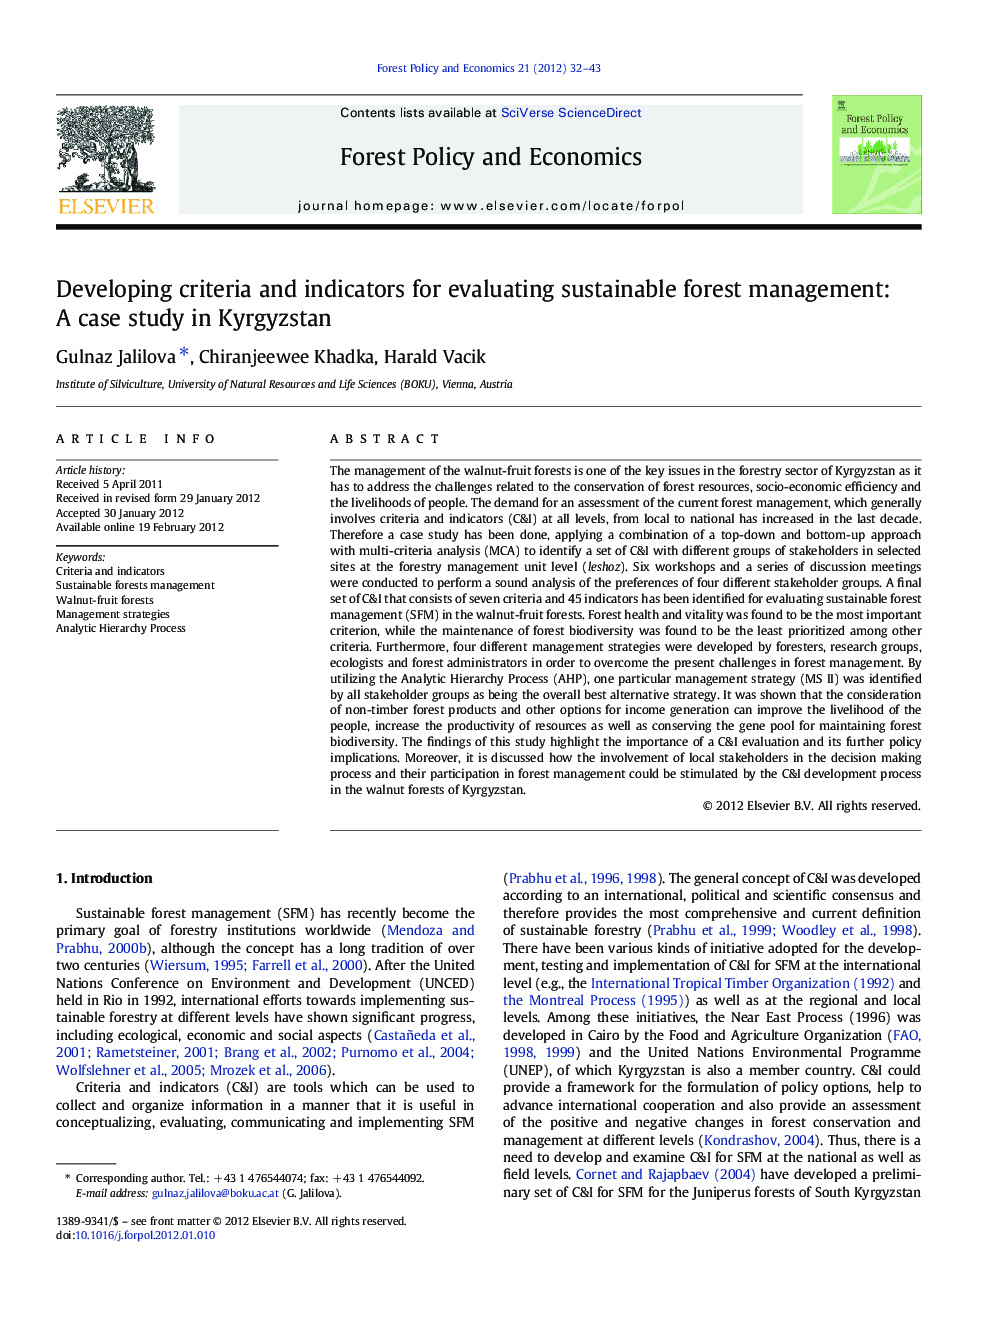 Developing criteria and indicators for evaluating sustainable forest management: A case study in Kyrgyzstan